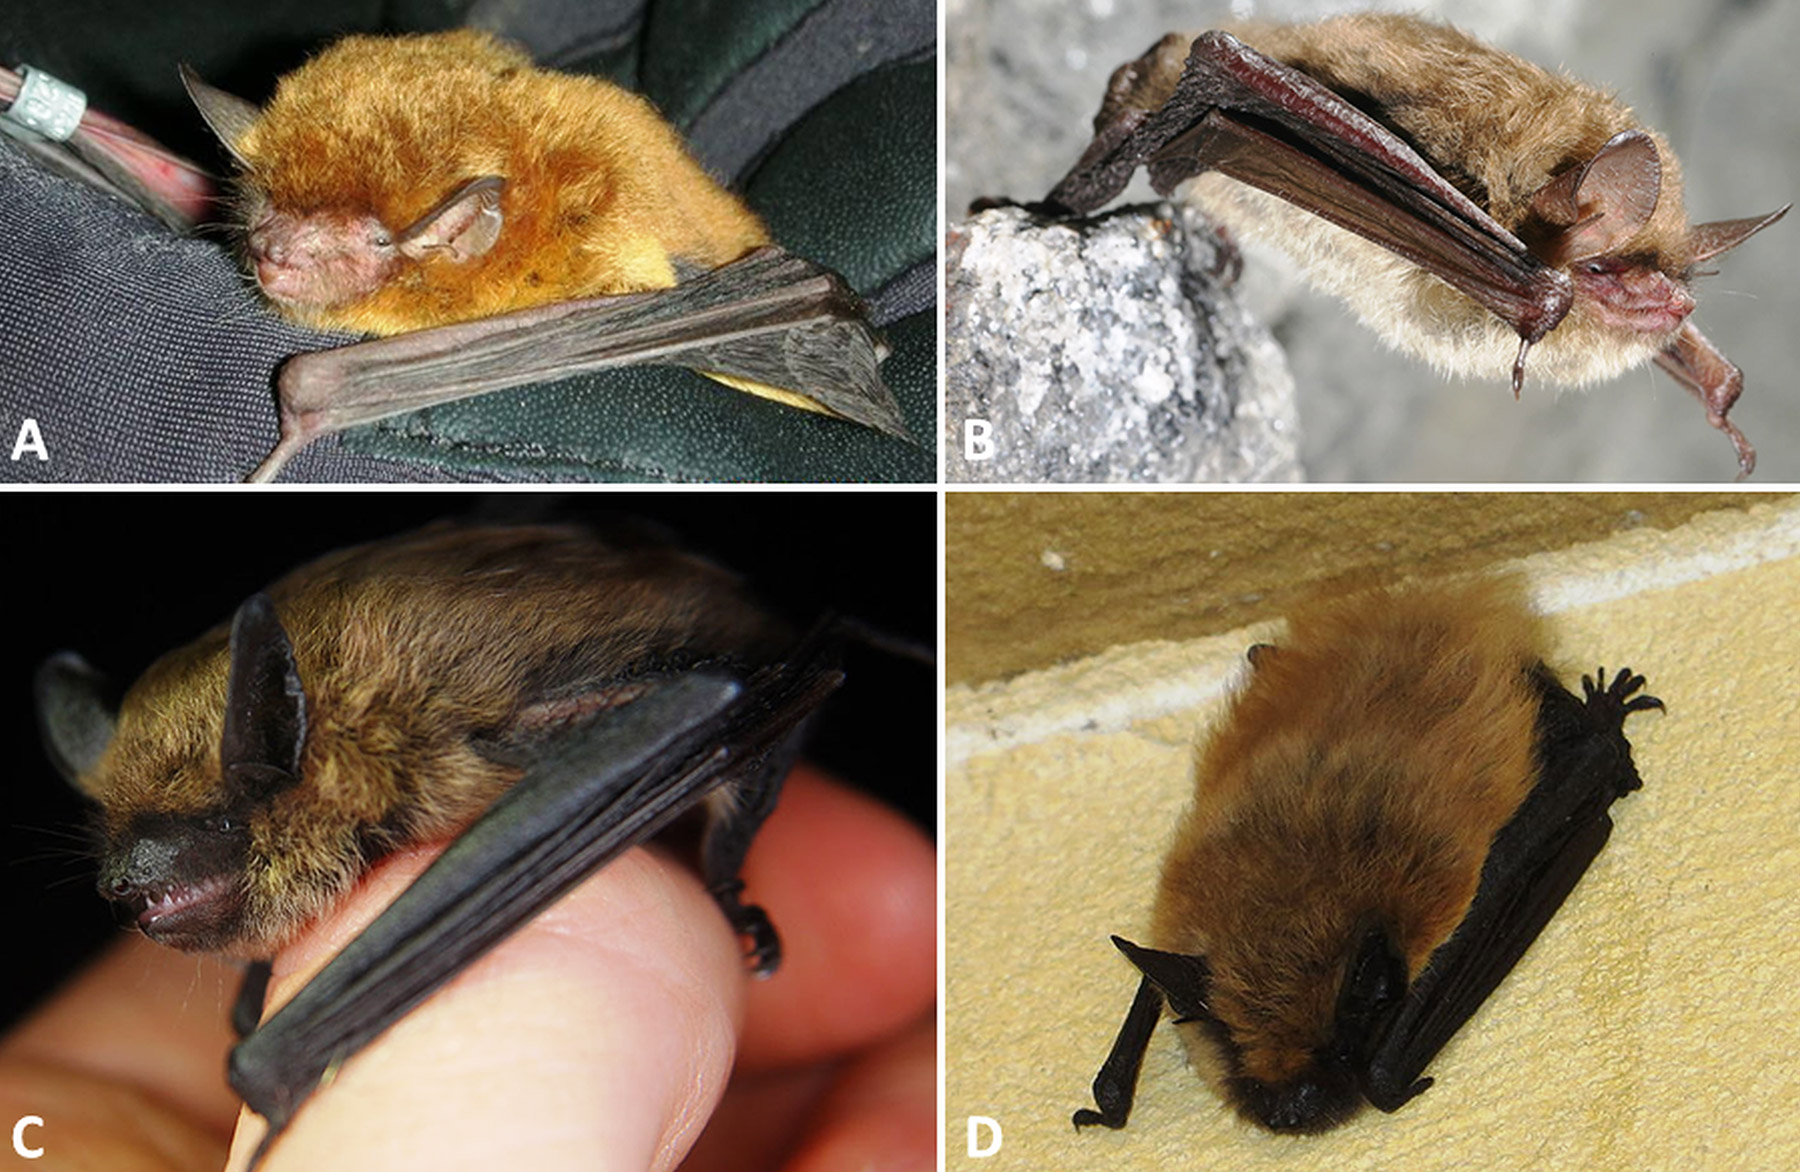 Four types of bat with corresponding letters